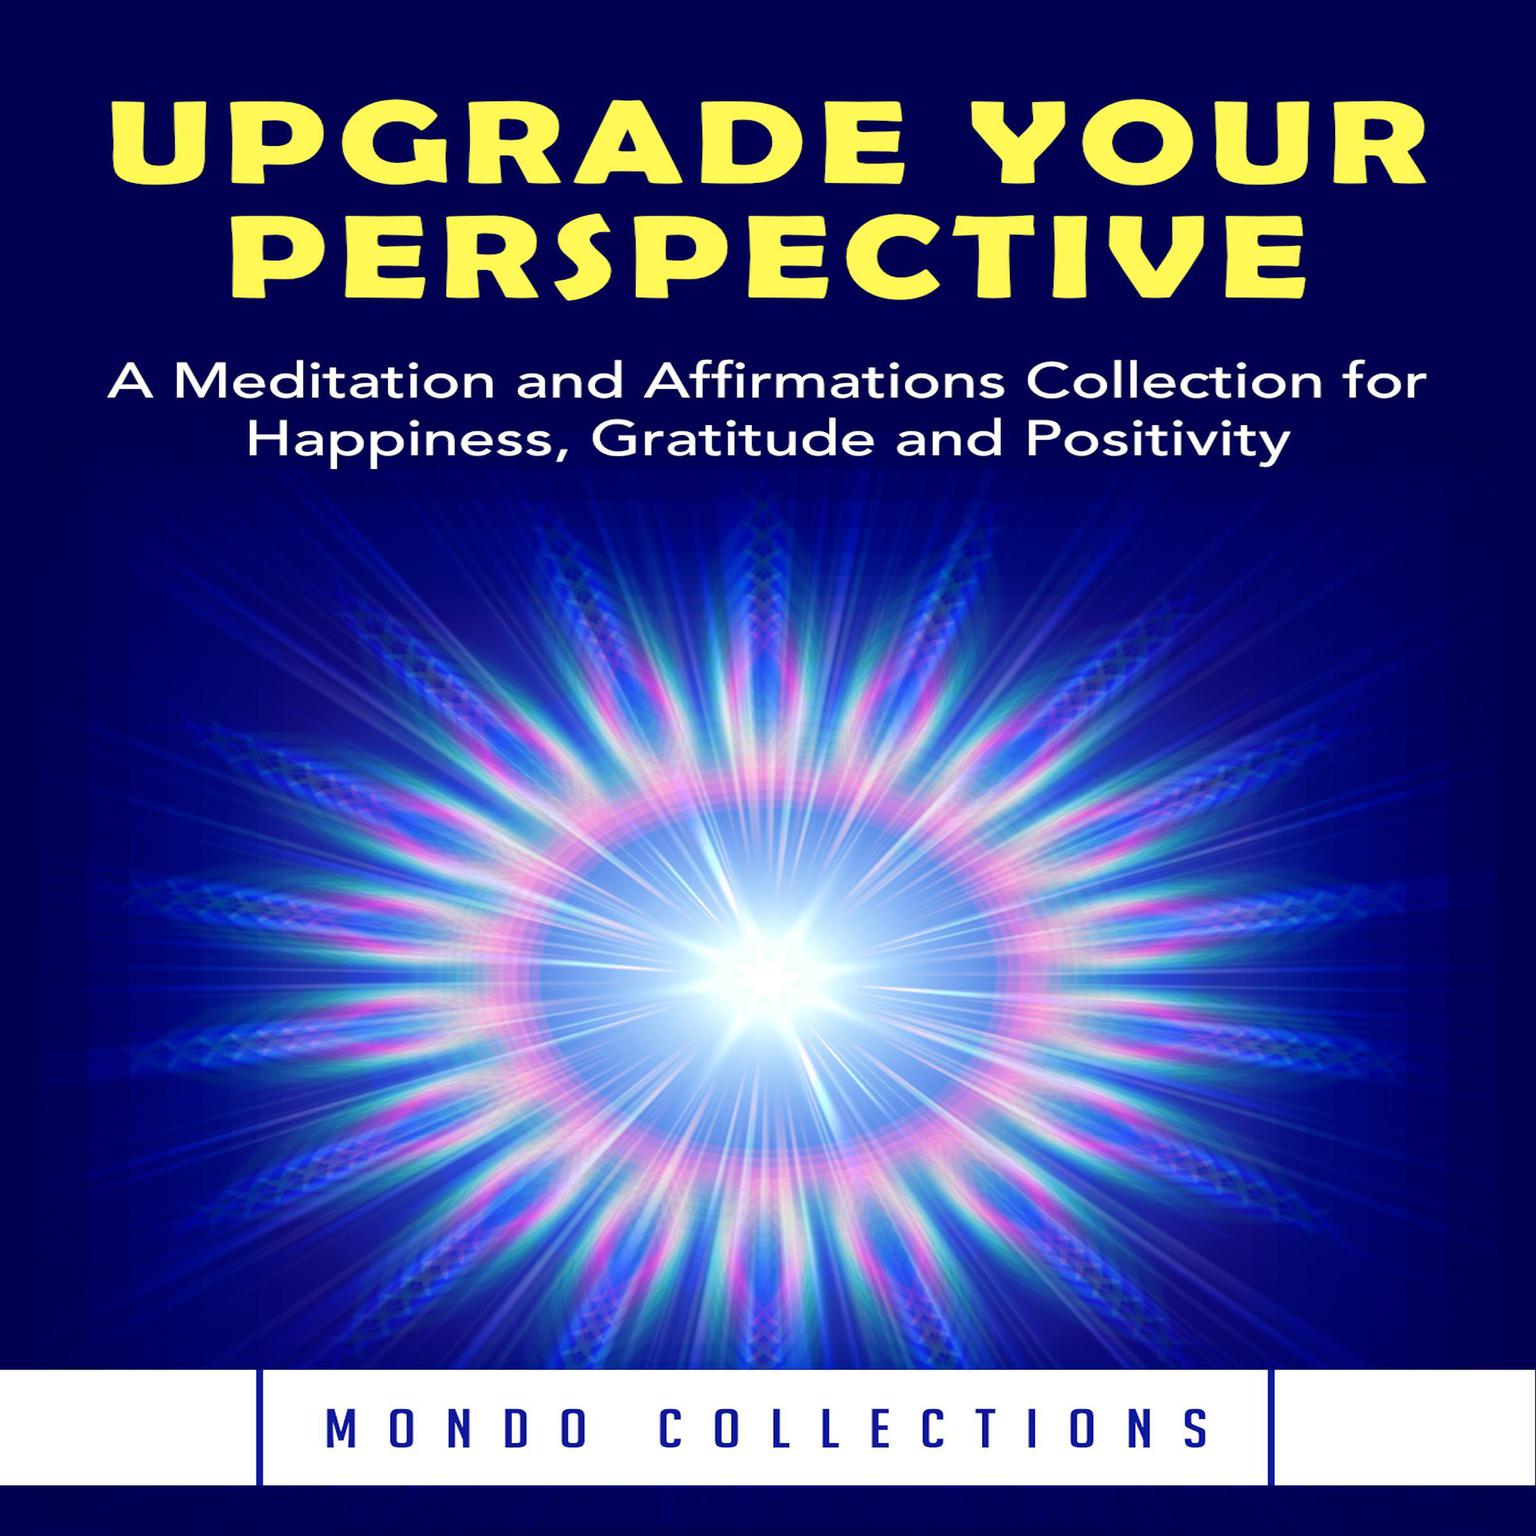 Upgrade Your Perspective: A Meditation and Affirmations Collection for Happiness, Gratitude and Positivity Audiobook, by Mondo Collections